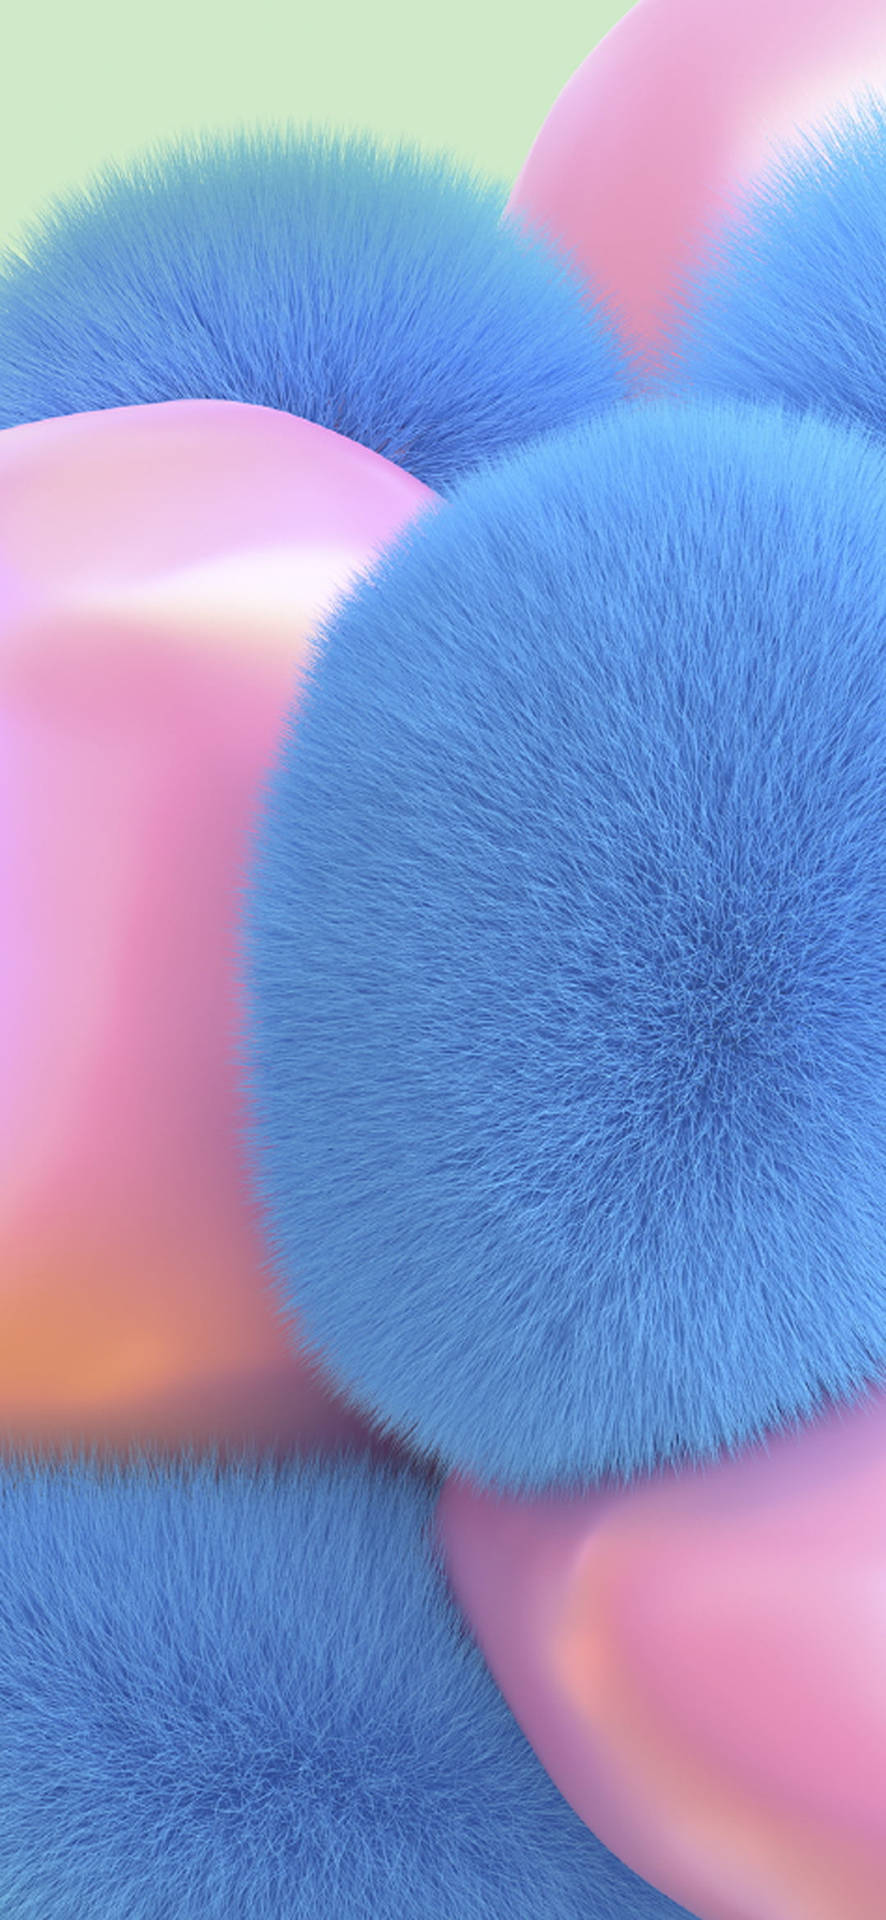 Soft And Fuzzy Balls On Samsung Full Hd Wallpaper